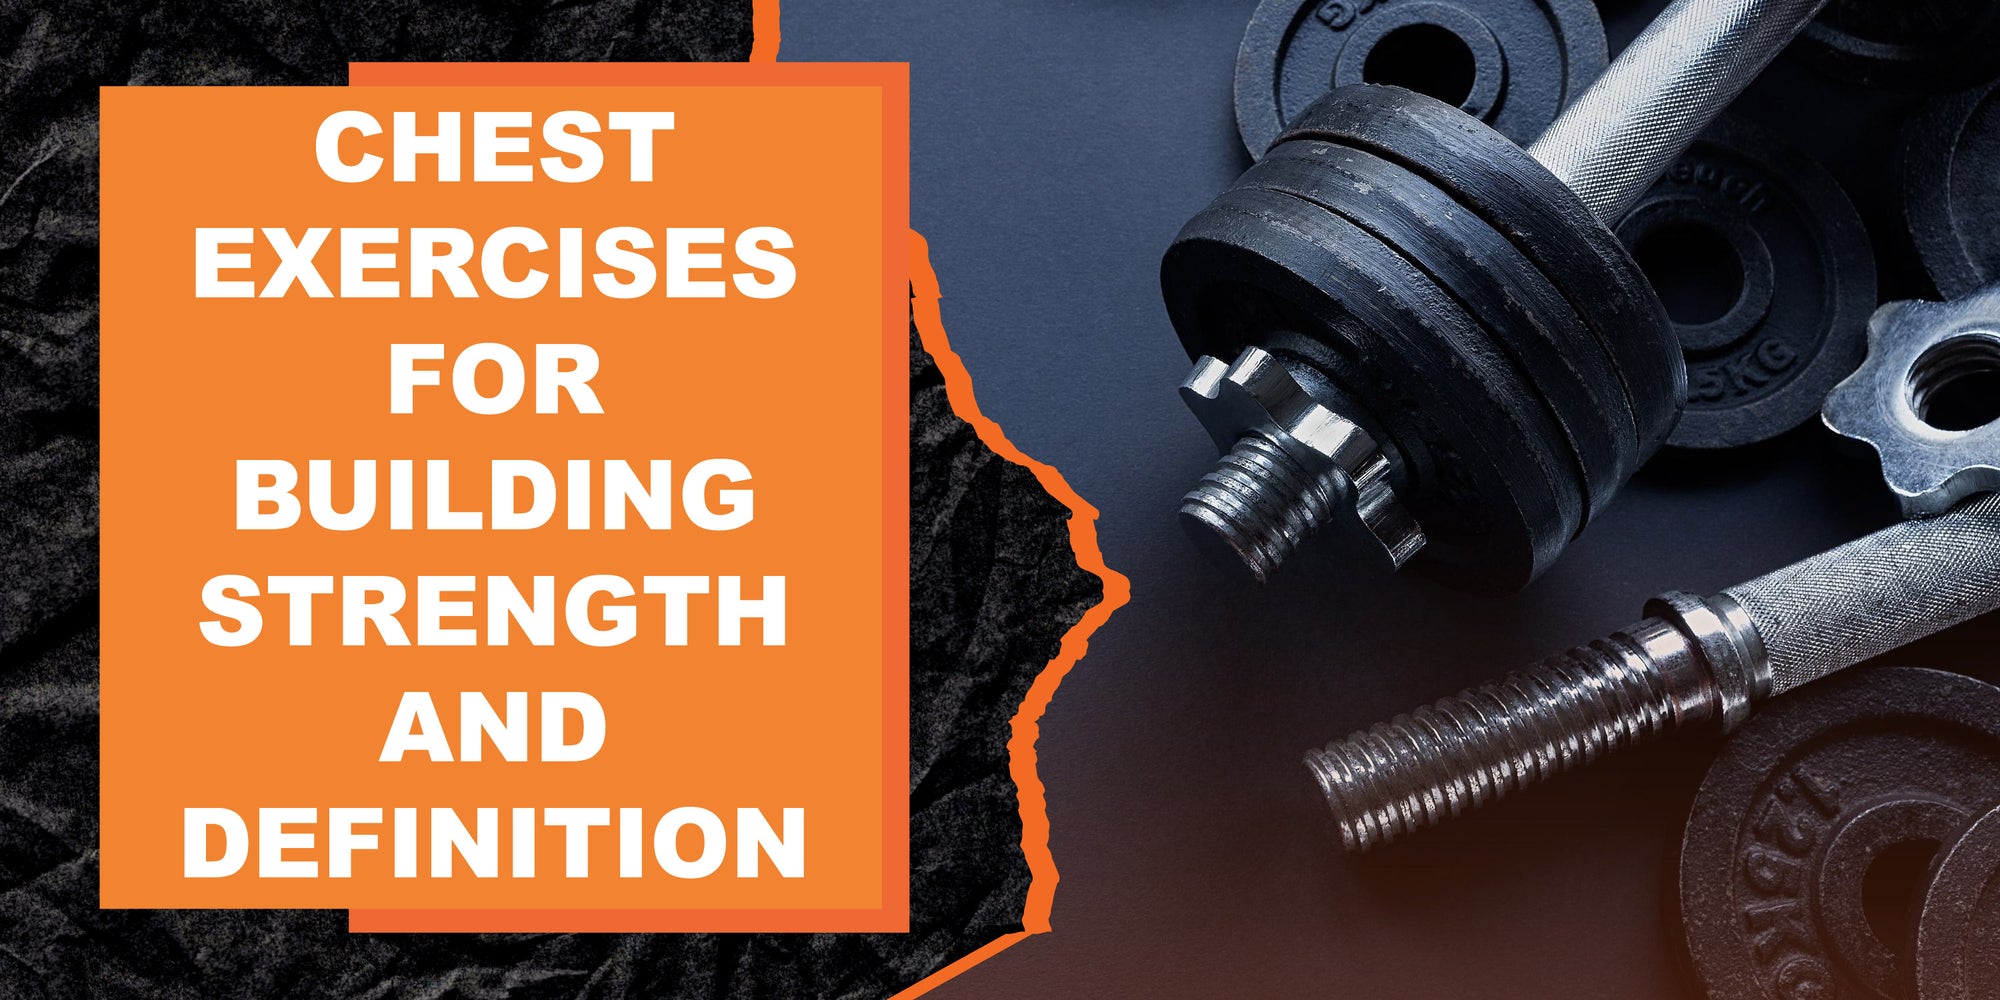 Chest Exercises for Building Strength and Definition